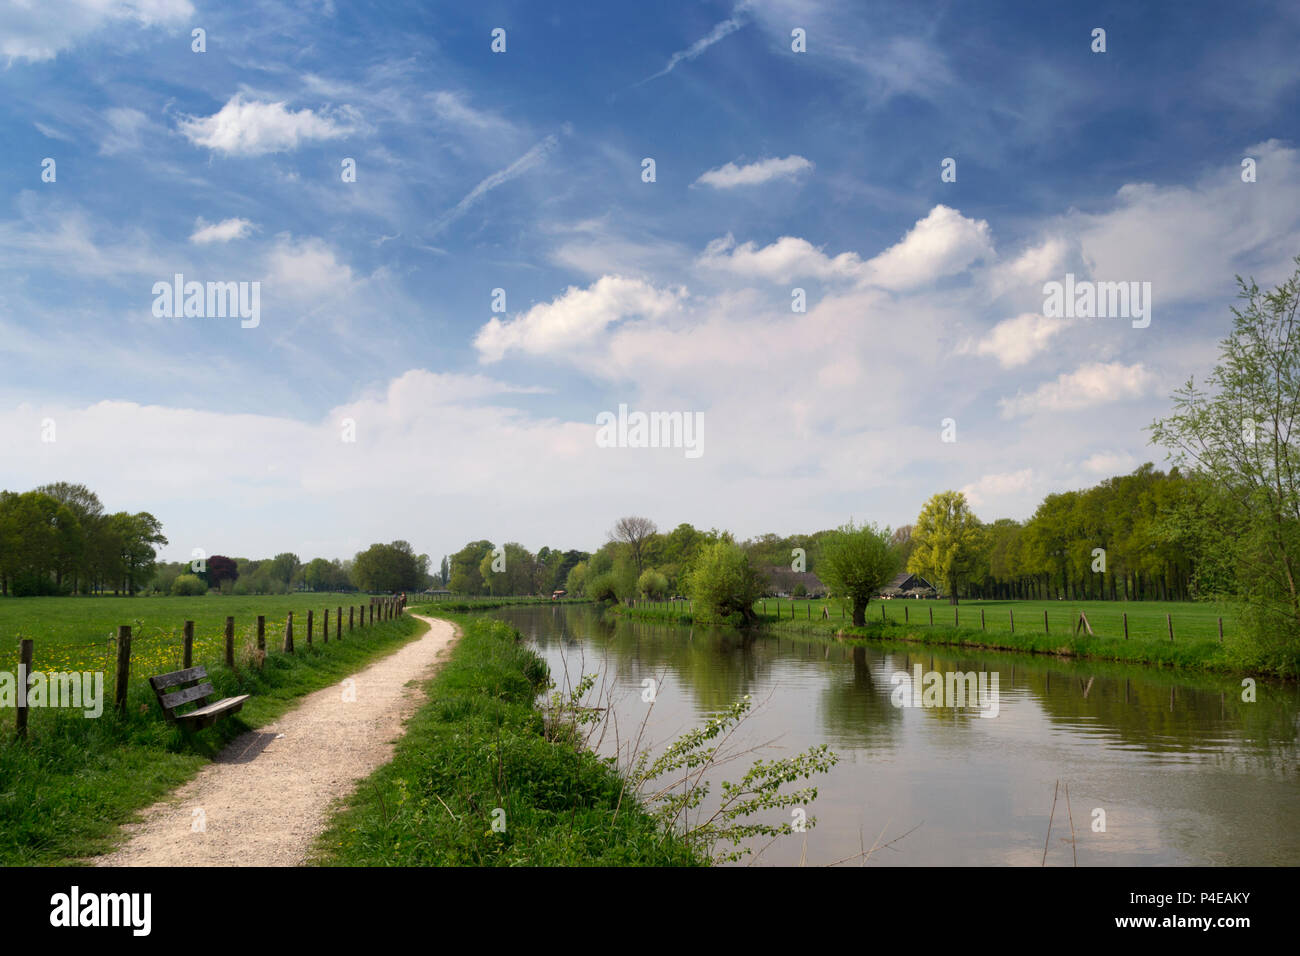 Authentic Dutch landscape with river Kromme Rijn, walkway, blue sky, white clouds and trees on a sunny day Stock Photo